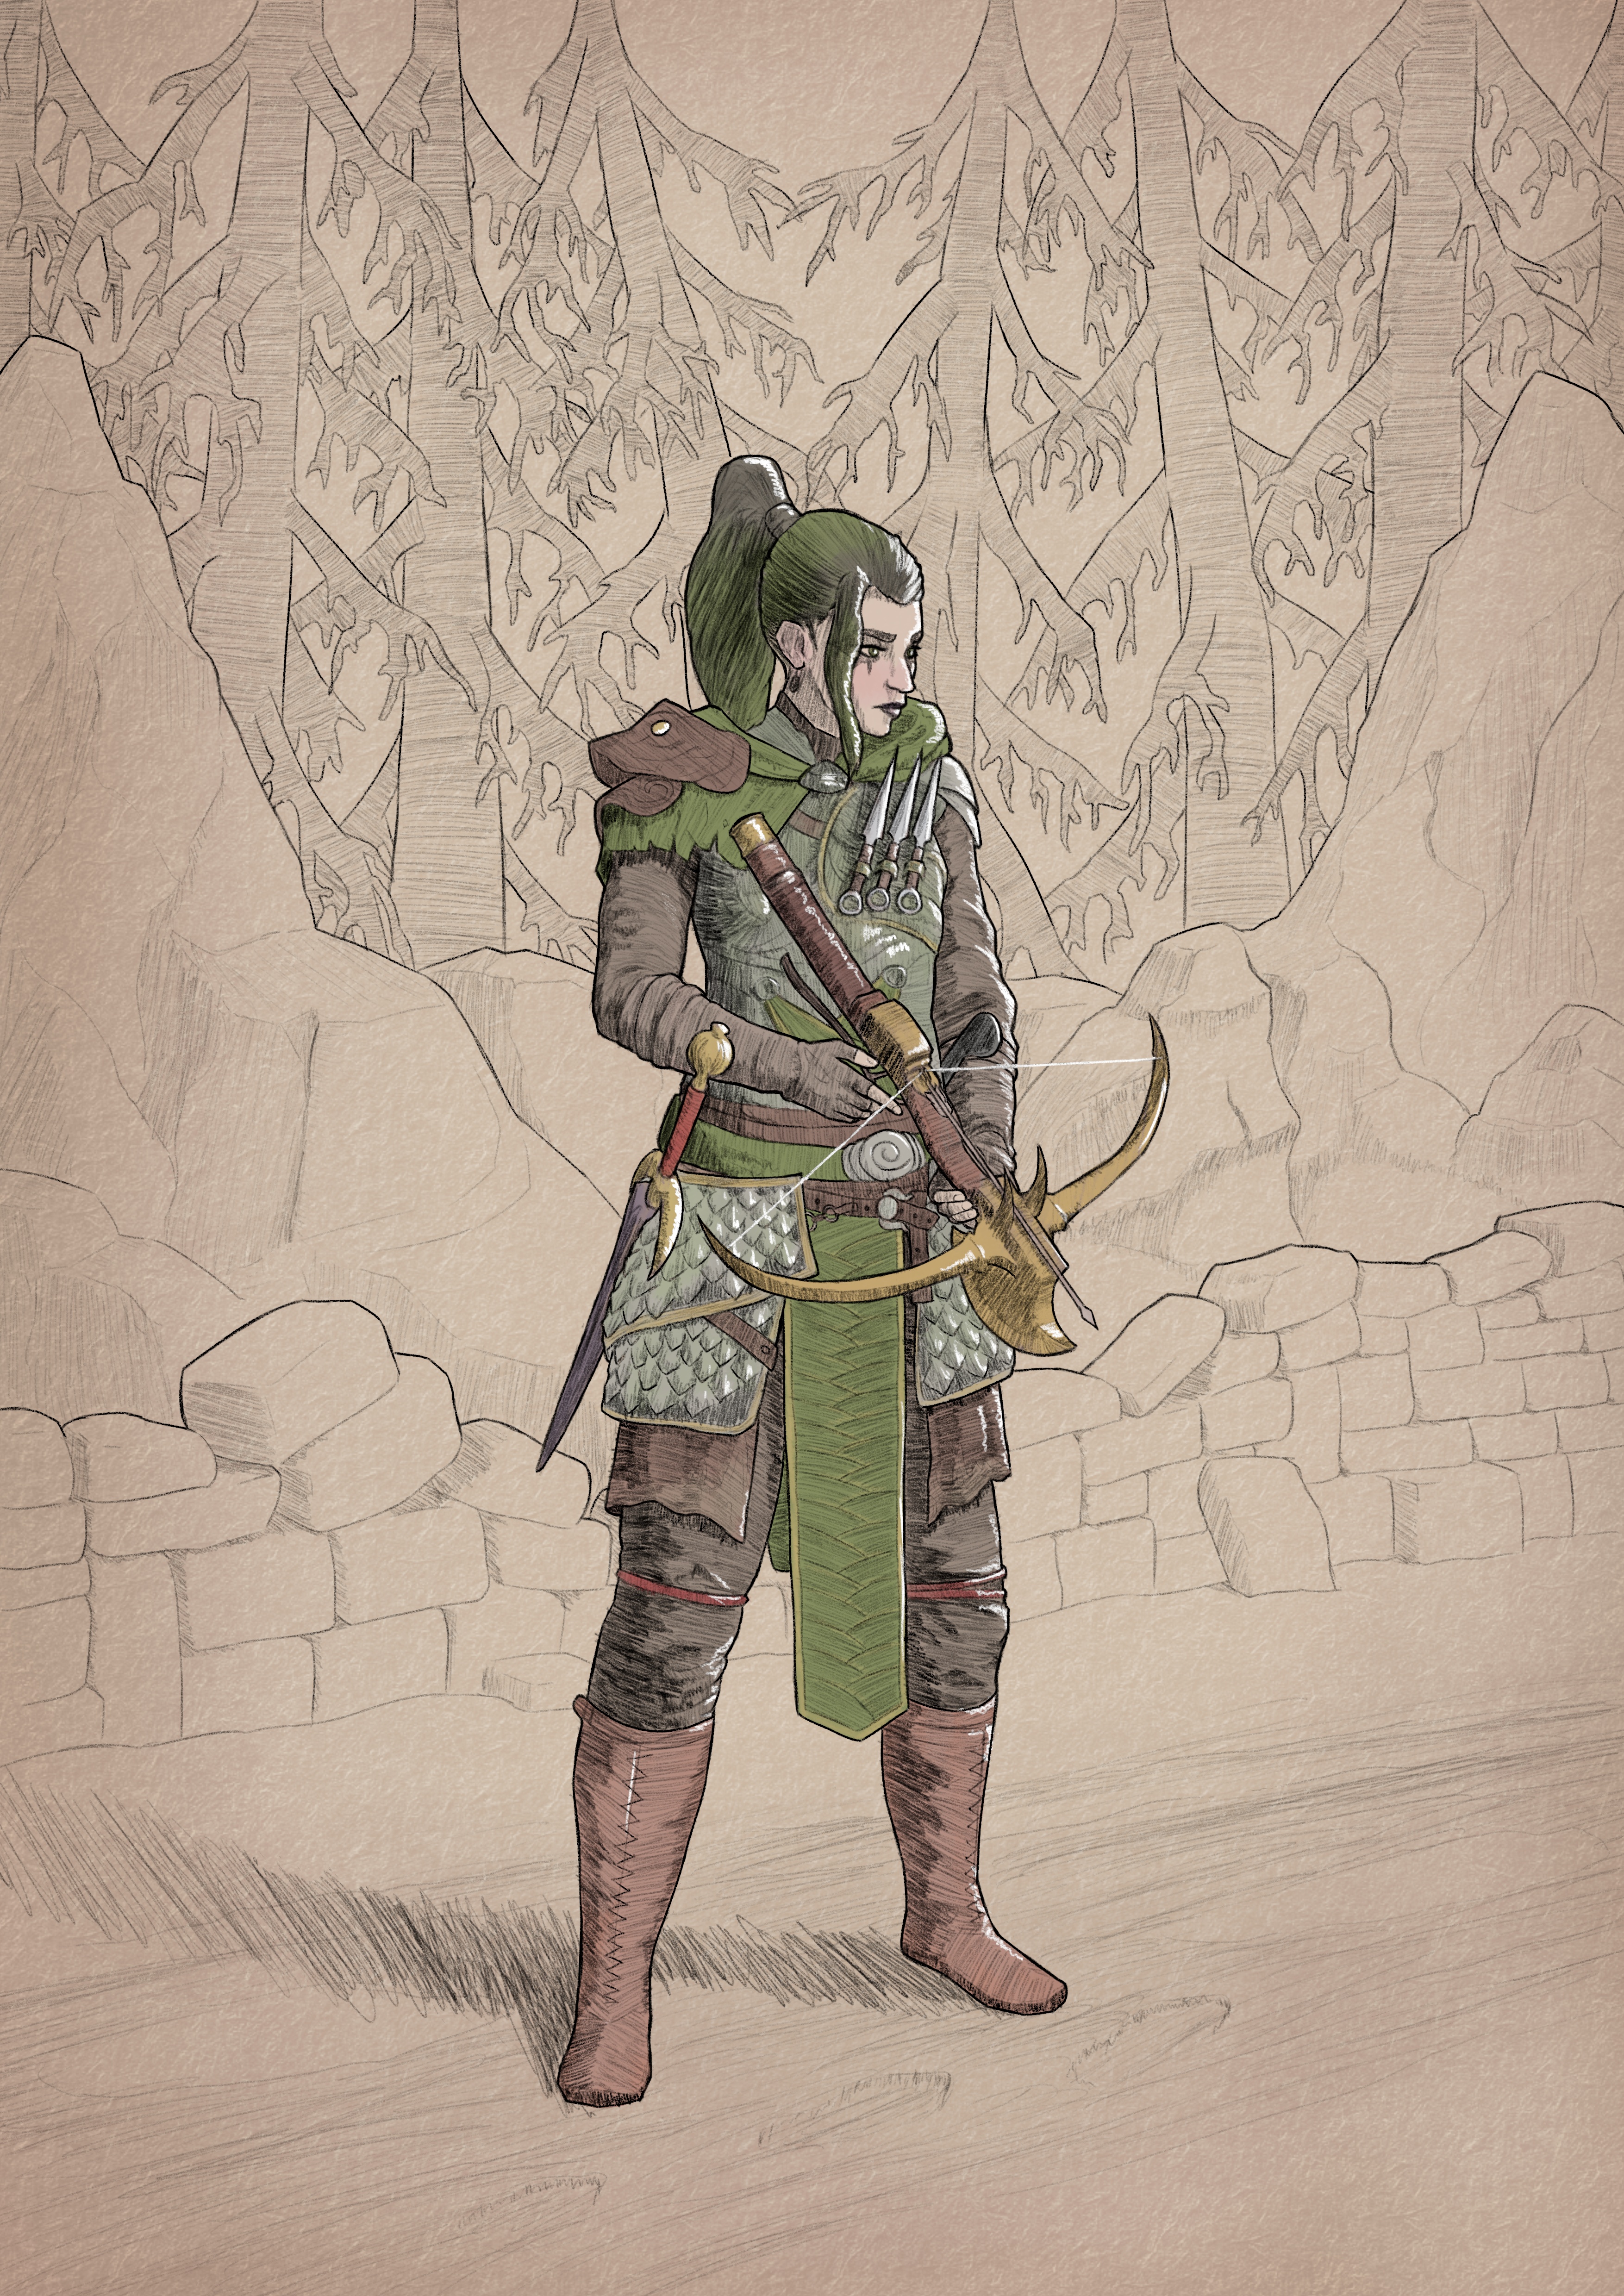 Digital drawing of a green-haired woman
standing on a muddy road in the snowy wilderness of Fractured Peaks.
She's wearing light leather and plate armor with a green cloth hood,
and carries a crossbow, two swords, and several small daggers.
